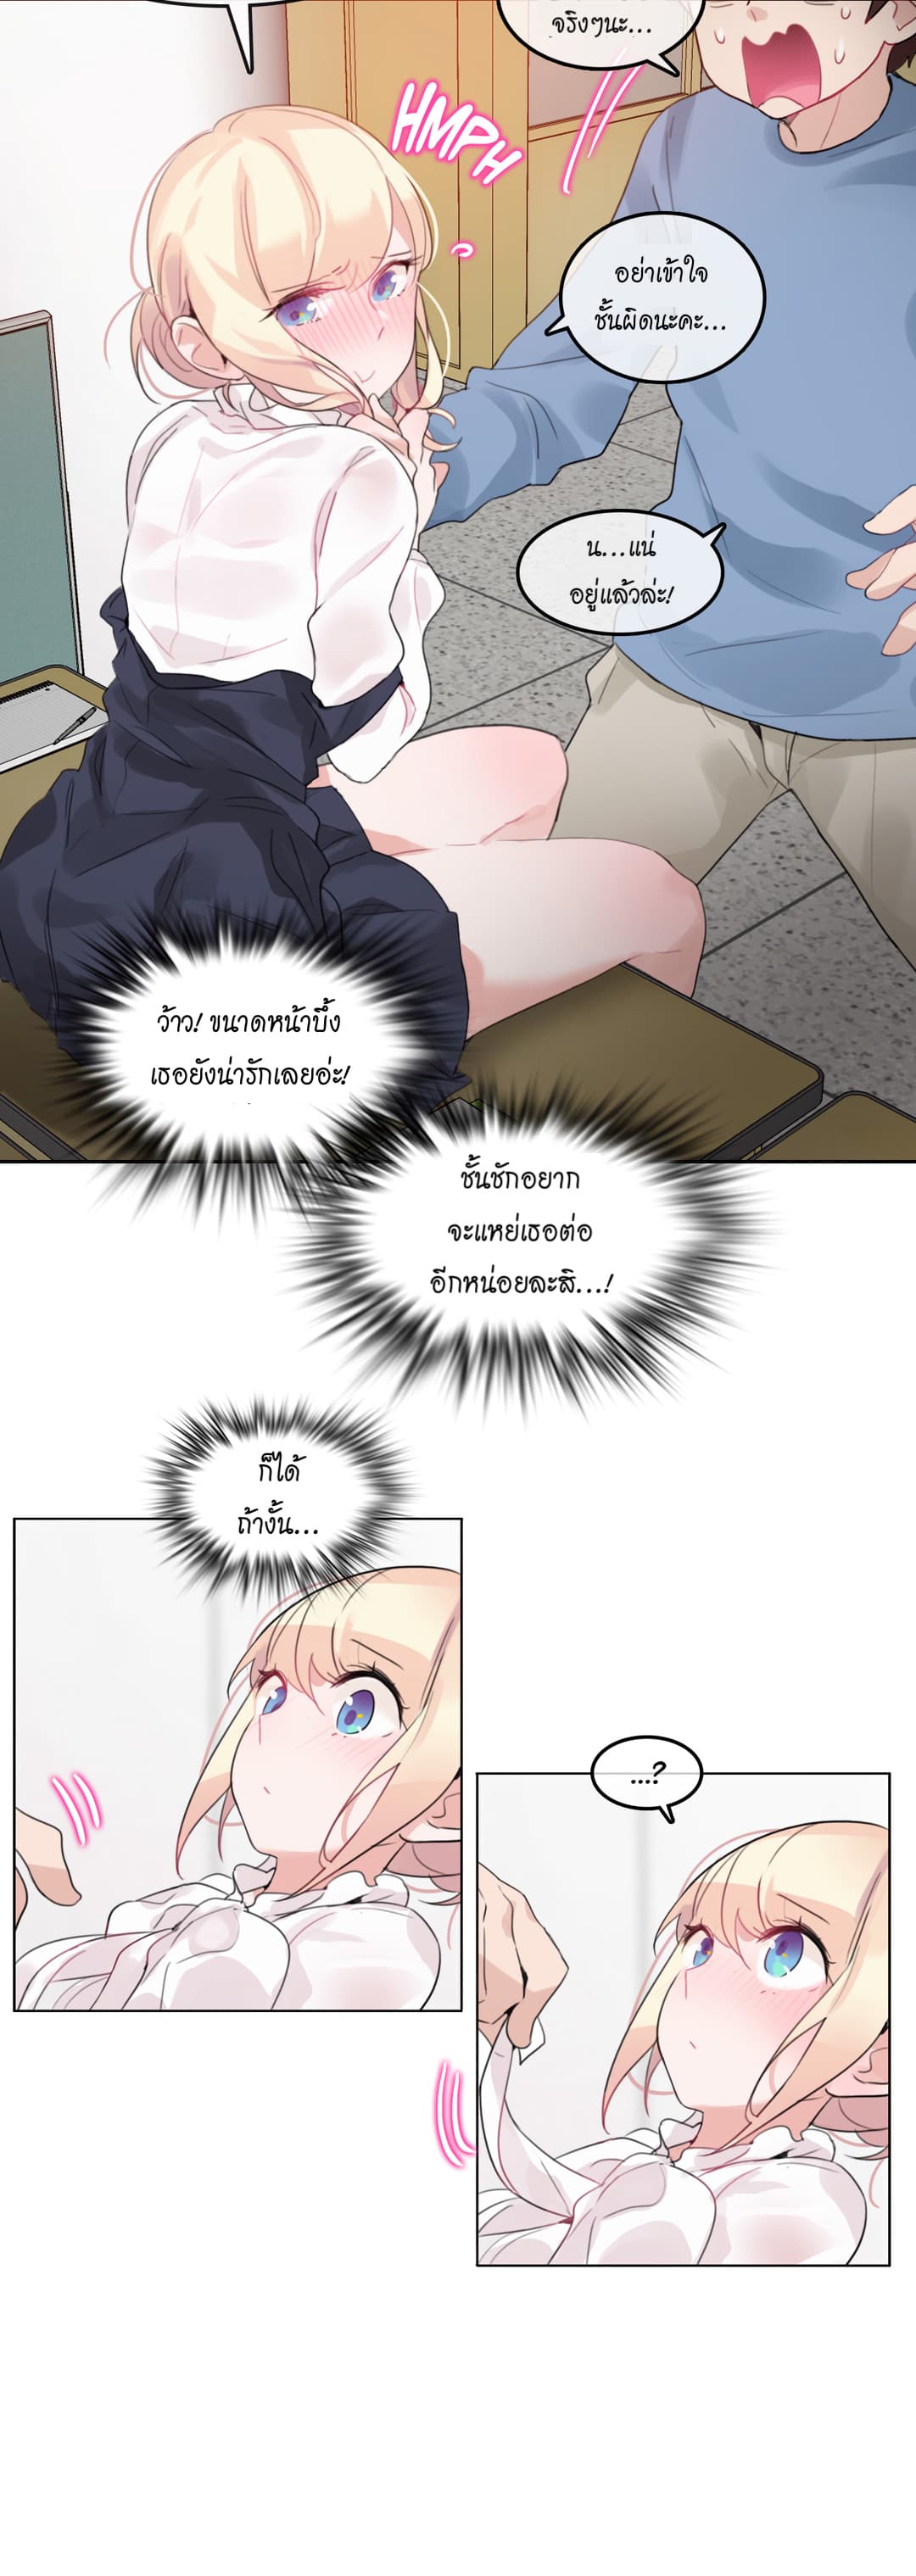 A Pervert’s Daily Life 24 (10)